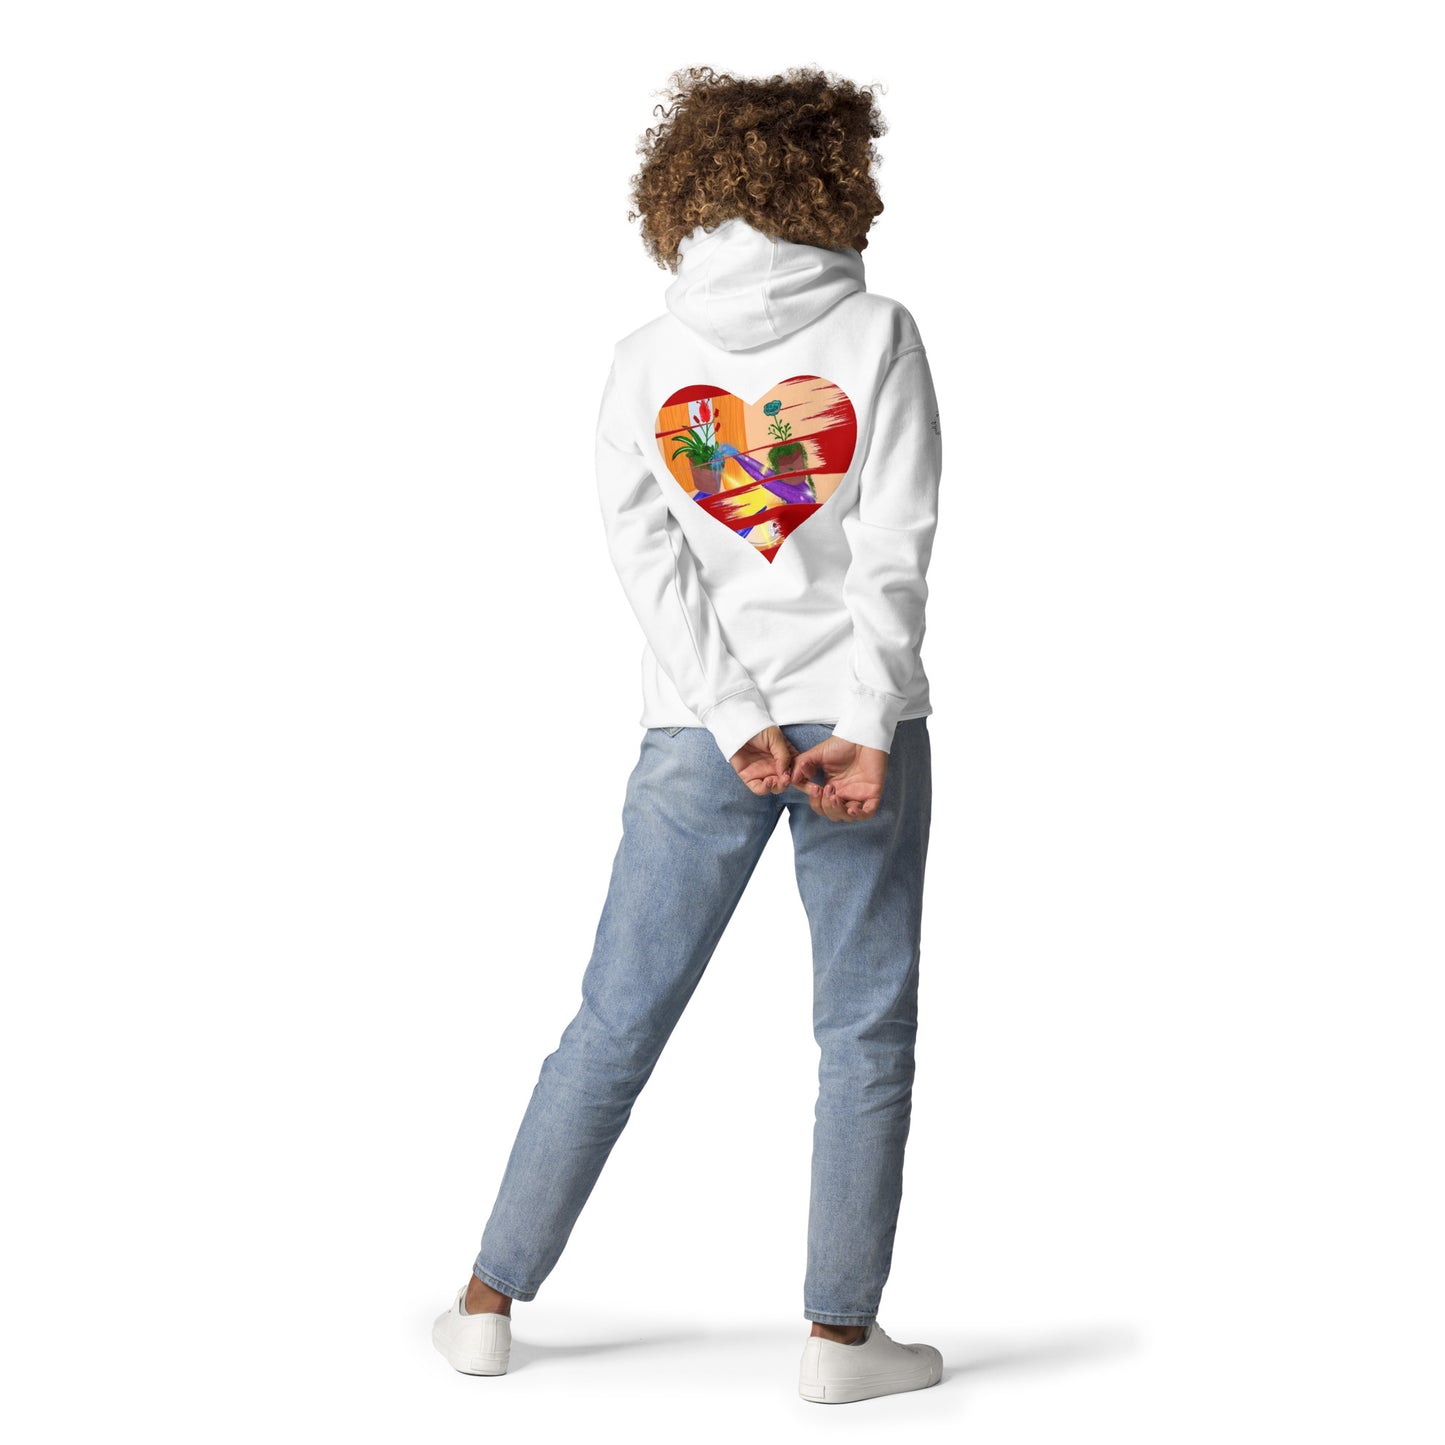 I'm a 10 and I'm Healing:  Unisex Hoodie - Flower Font